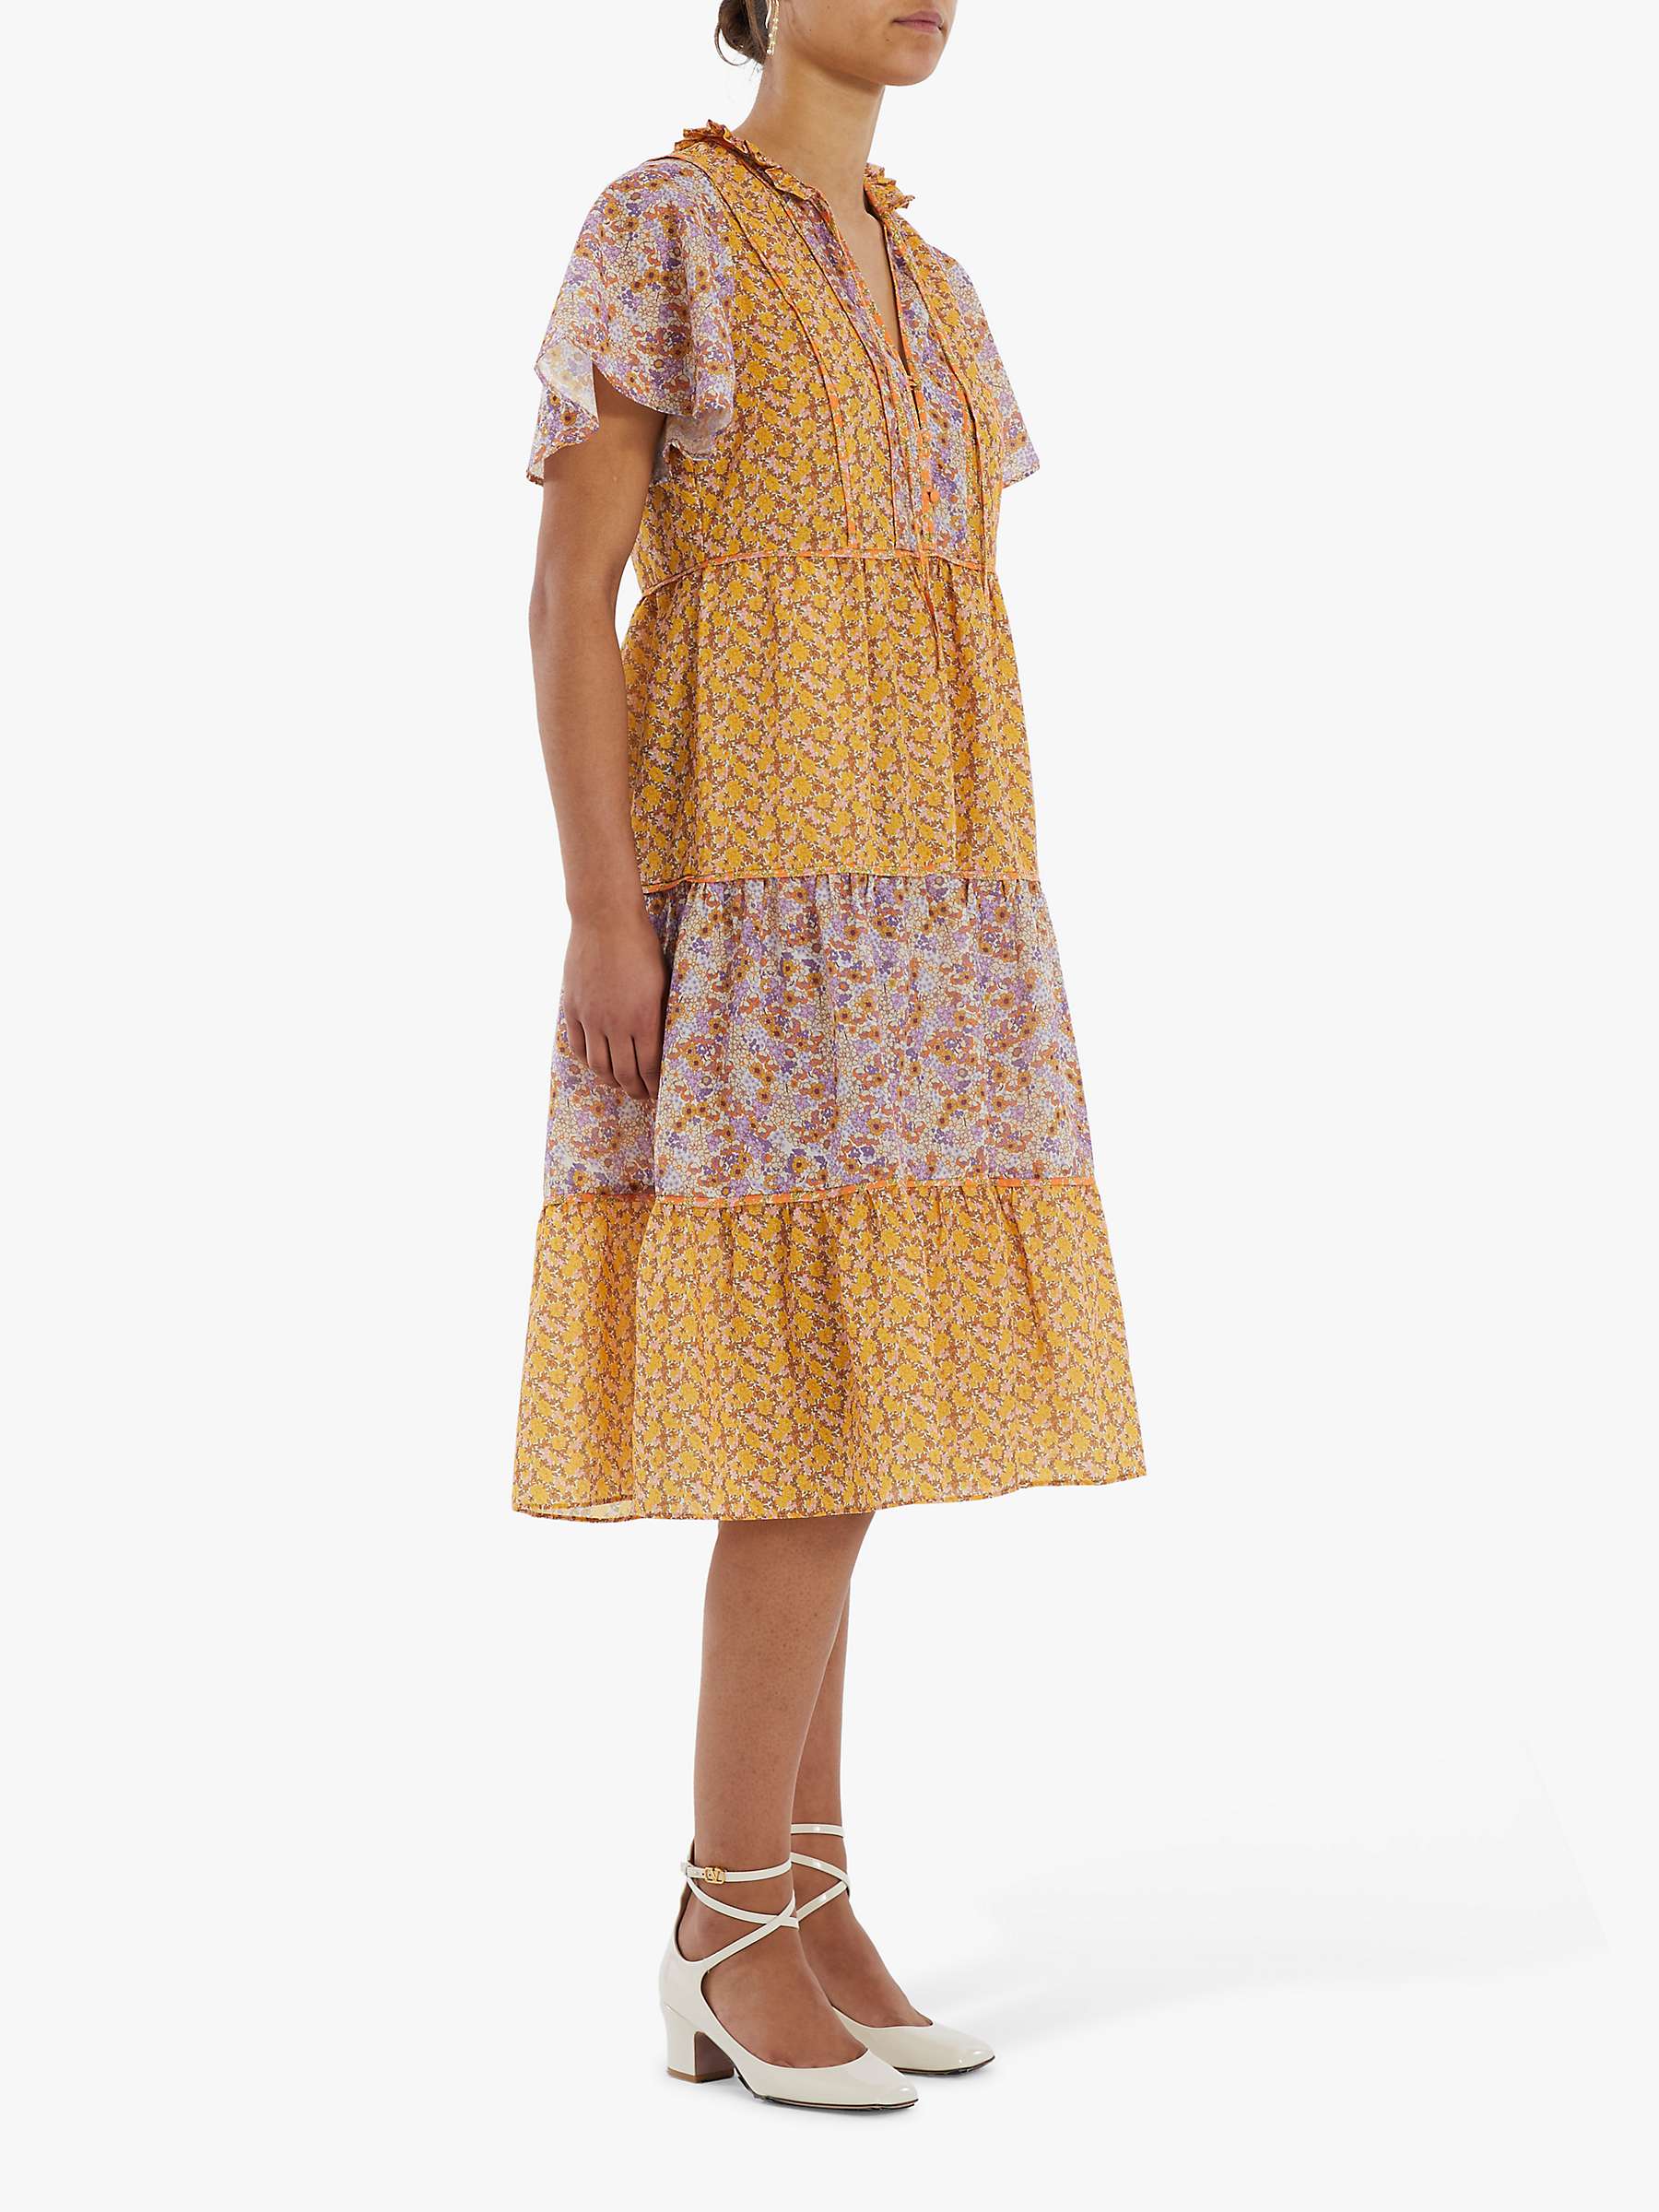 Buy Lollys Laundry Godwin Floral Tiered Dress, Yellow/Multi Online at johnlewis.com